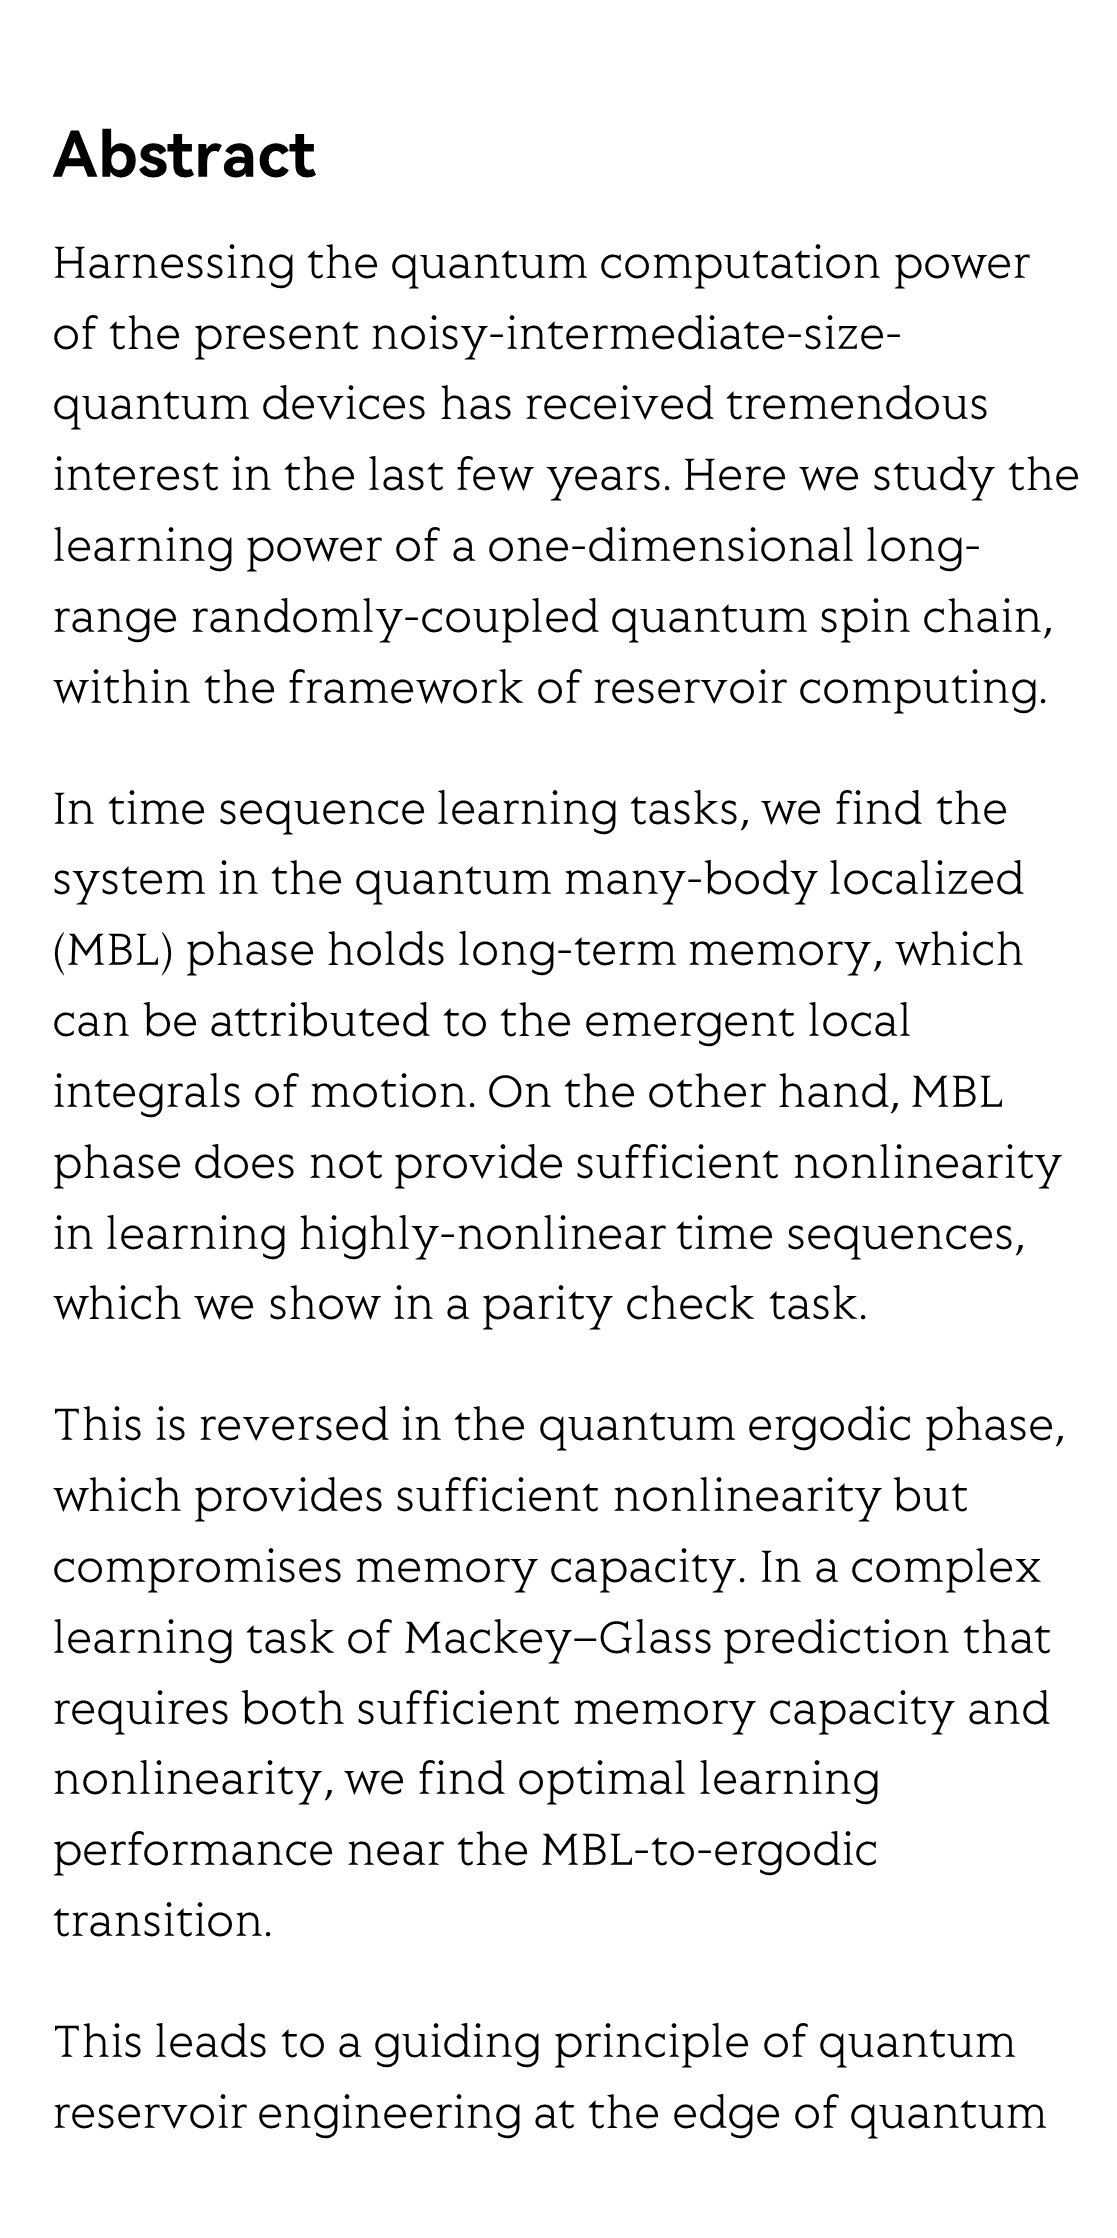 The reservoir learning power across quantum many-body localization transition_2